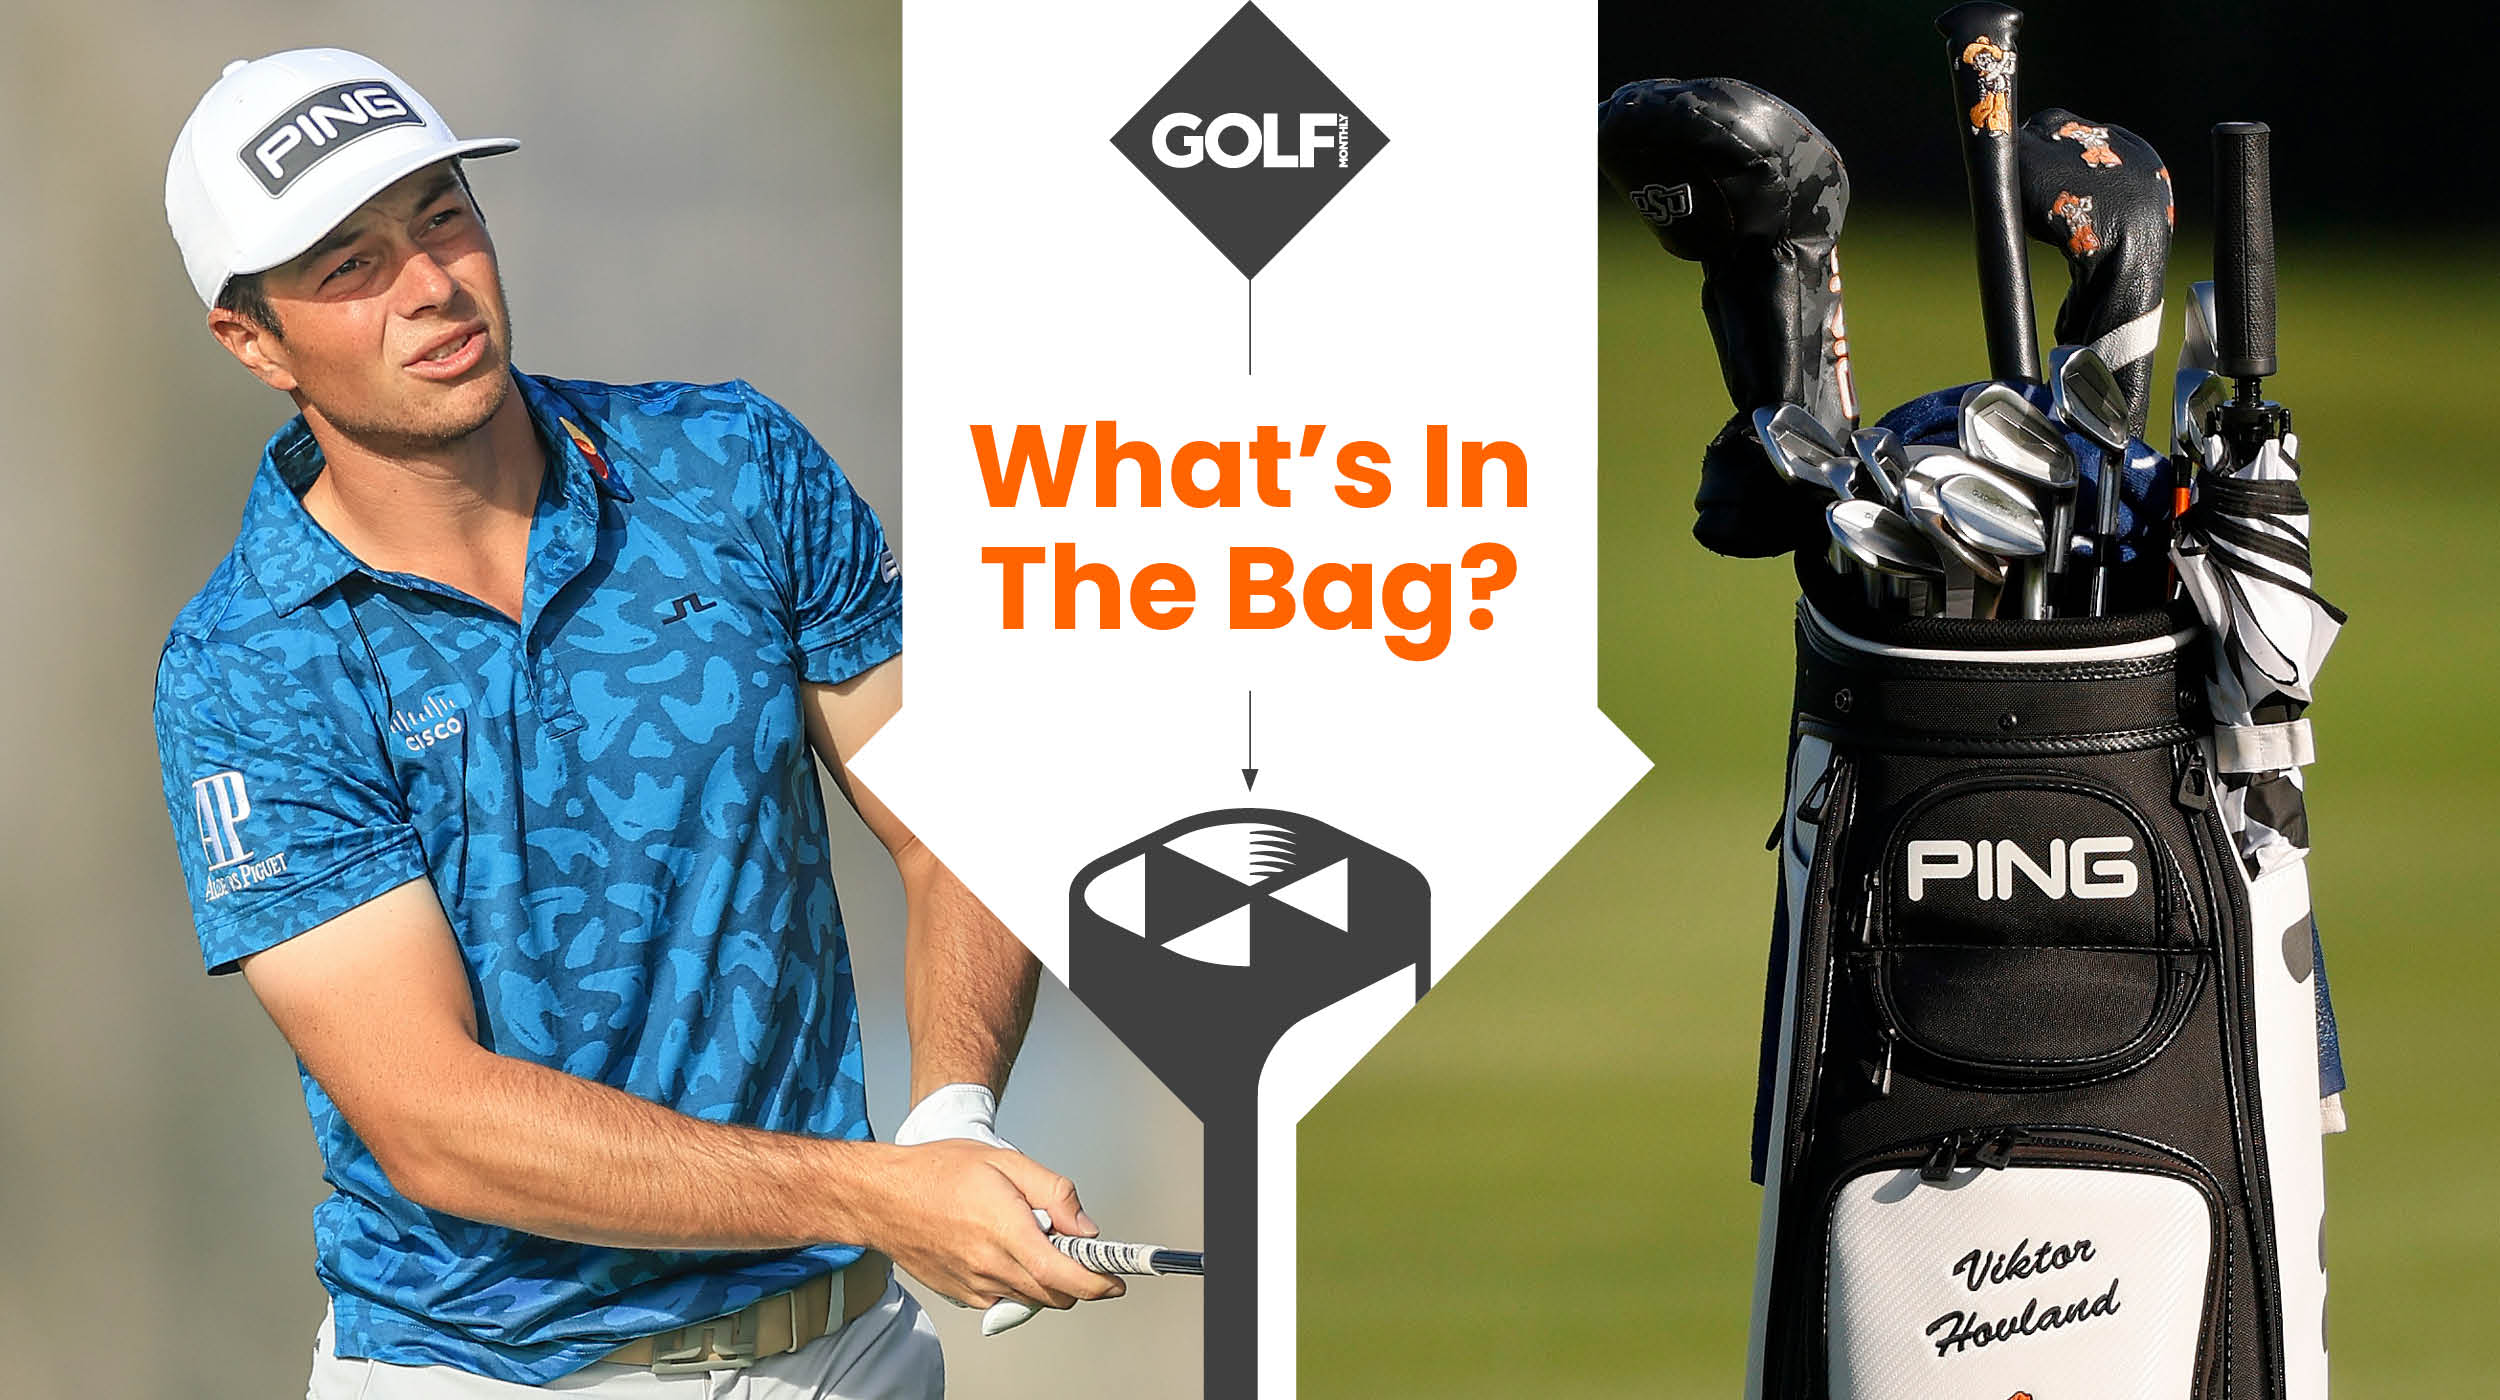 Viktor Hovland Whats In The Bag?